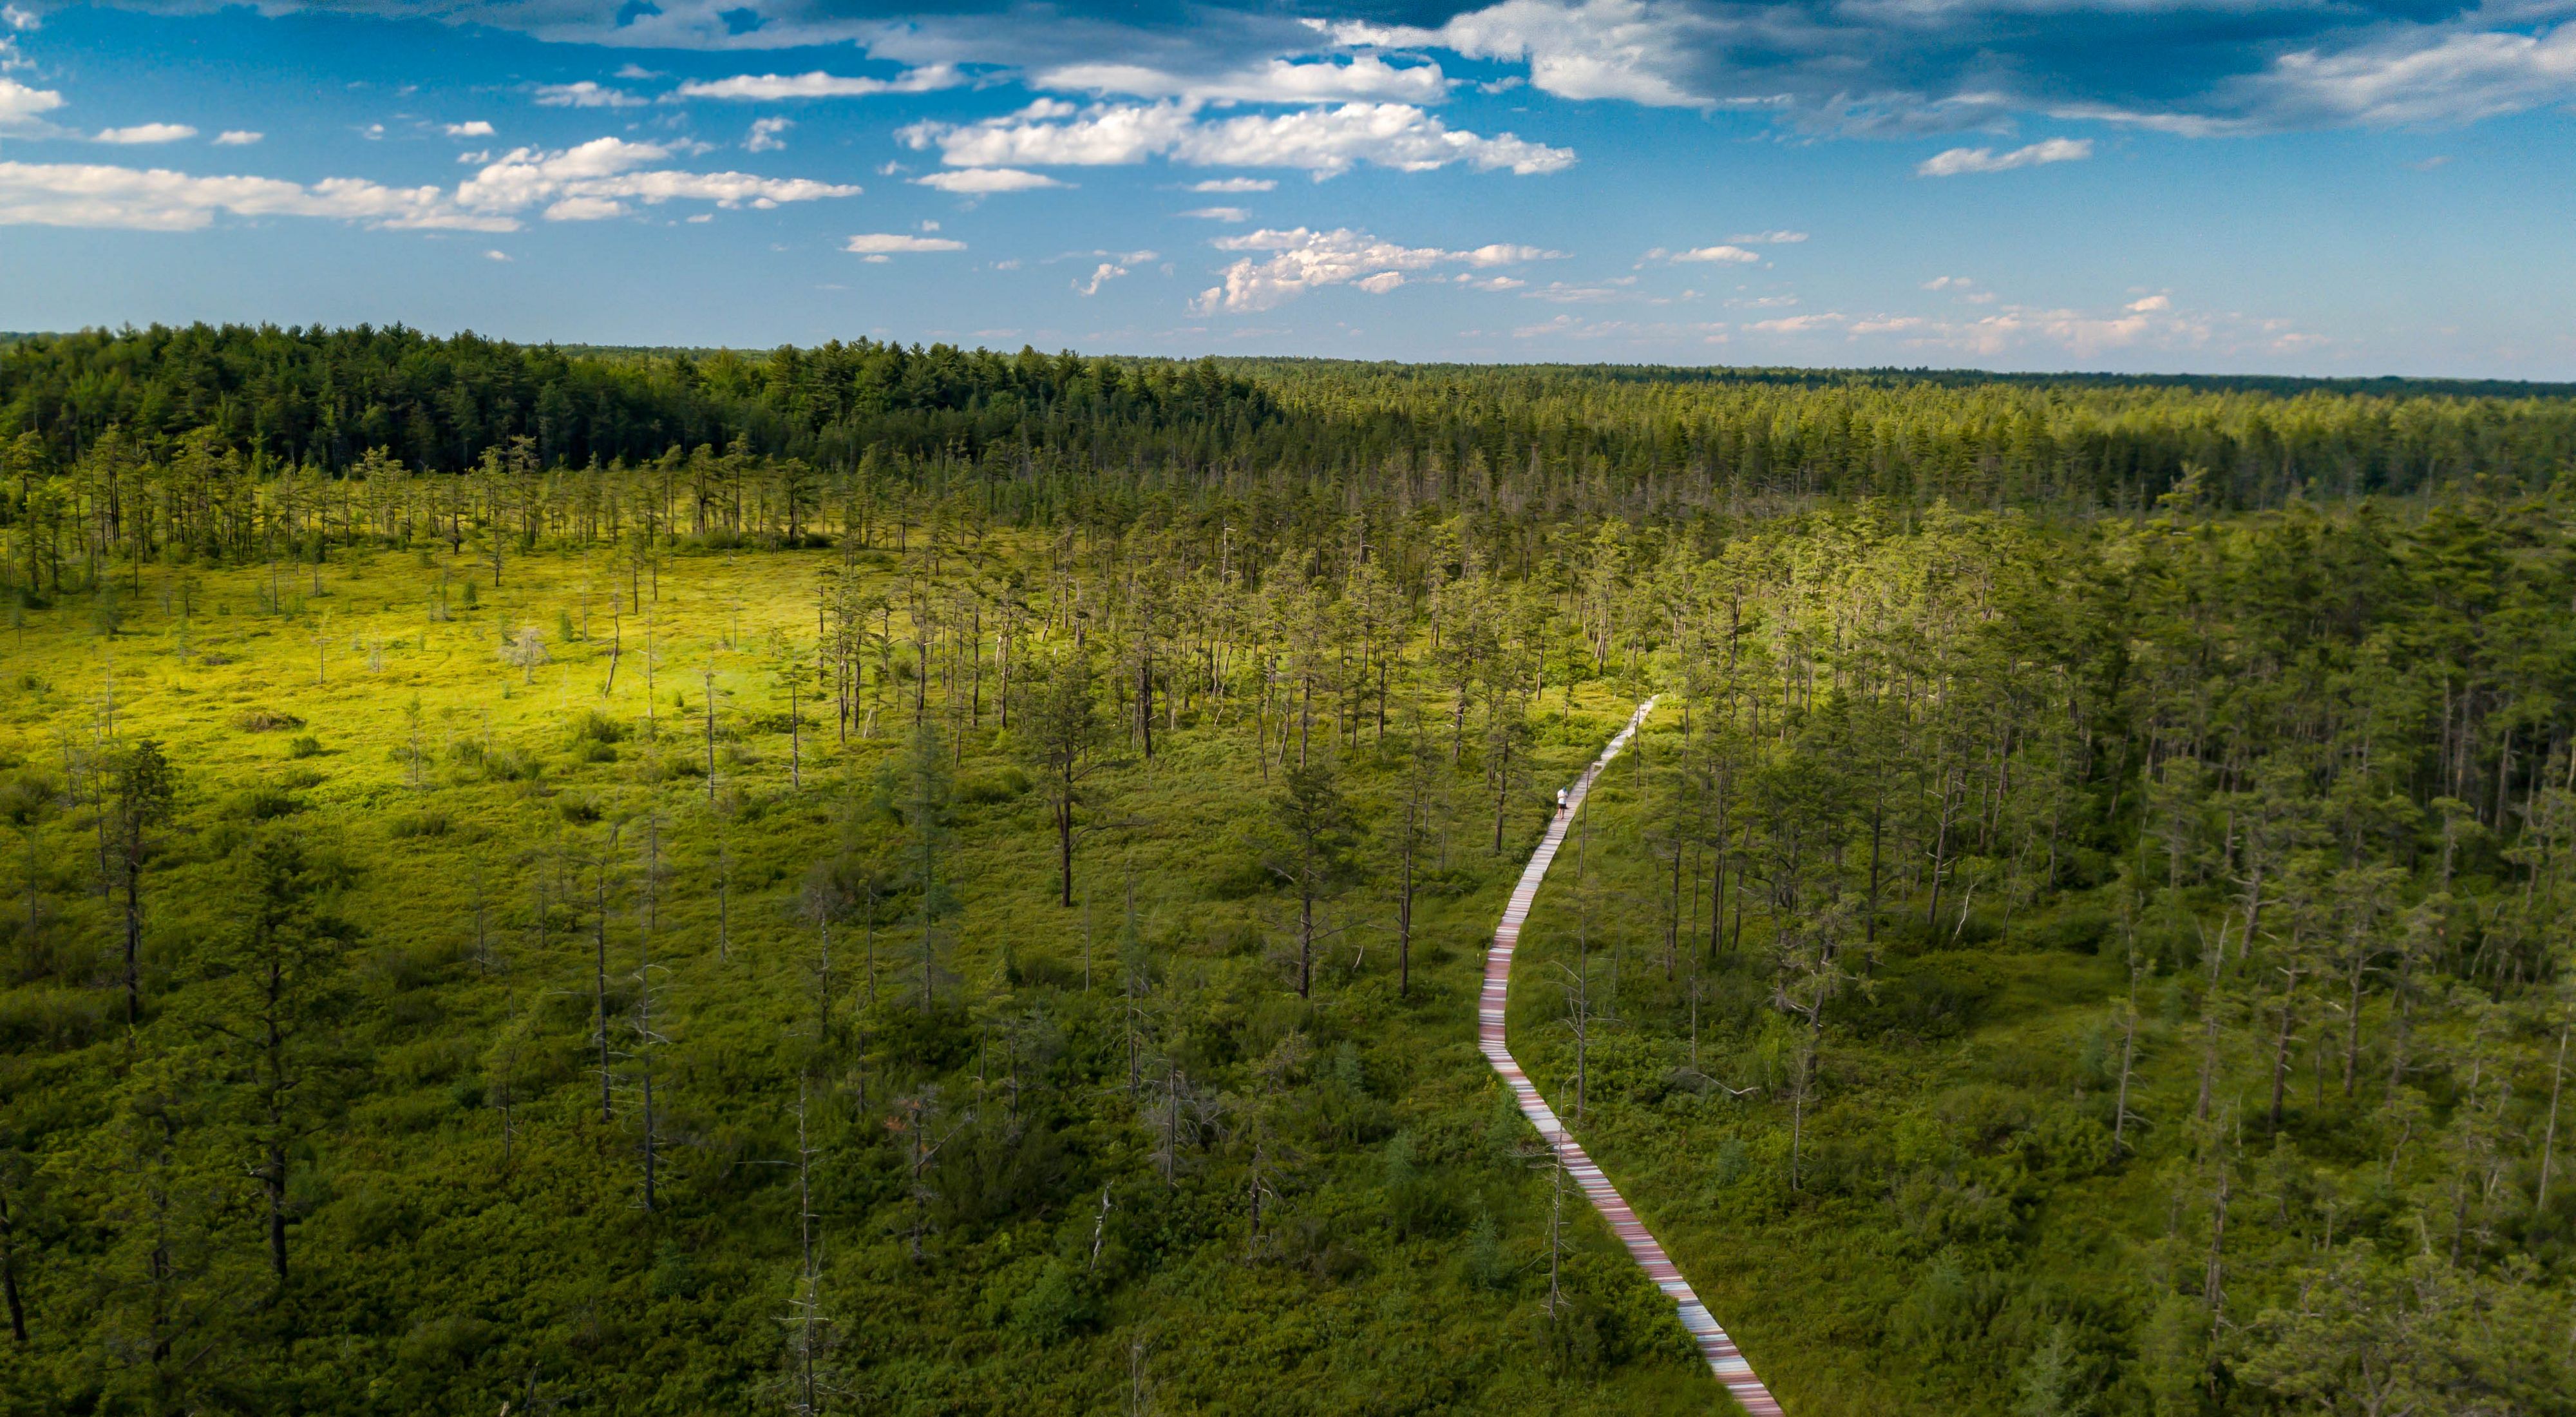 Aerial view of a long wooden boardwalk extending through forests and scrubby heath.